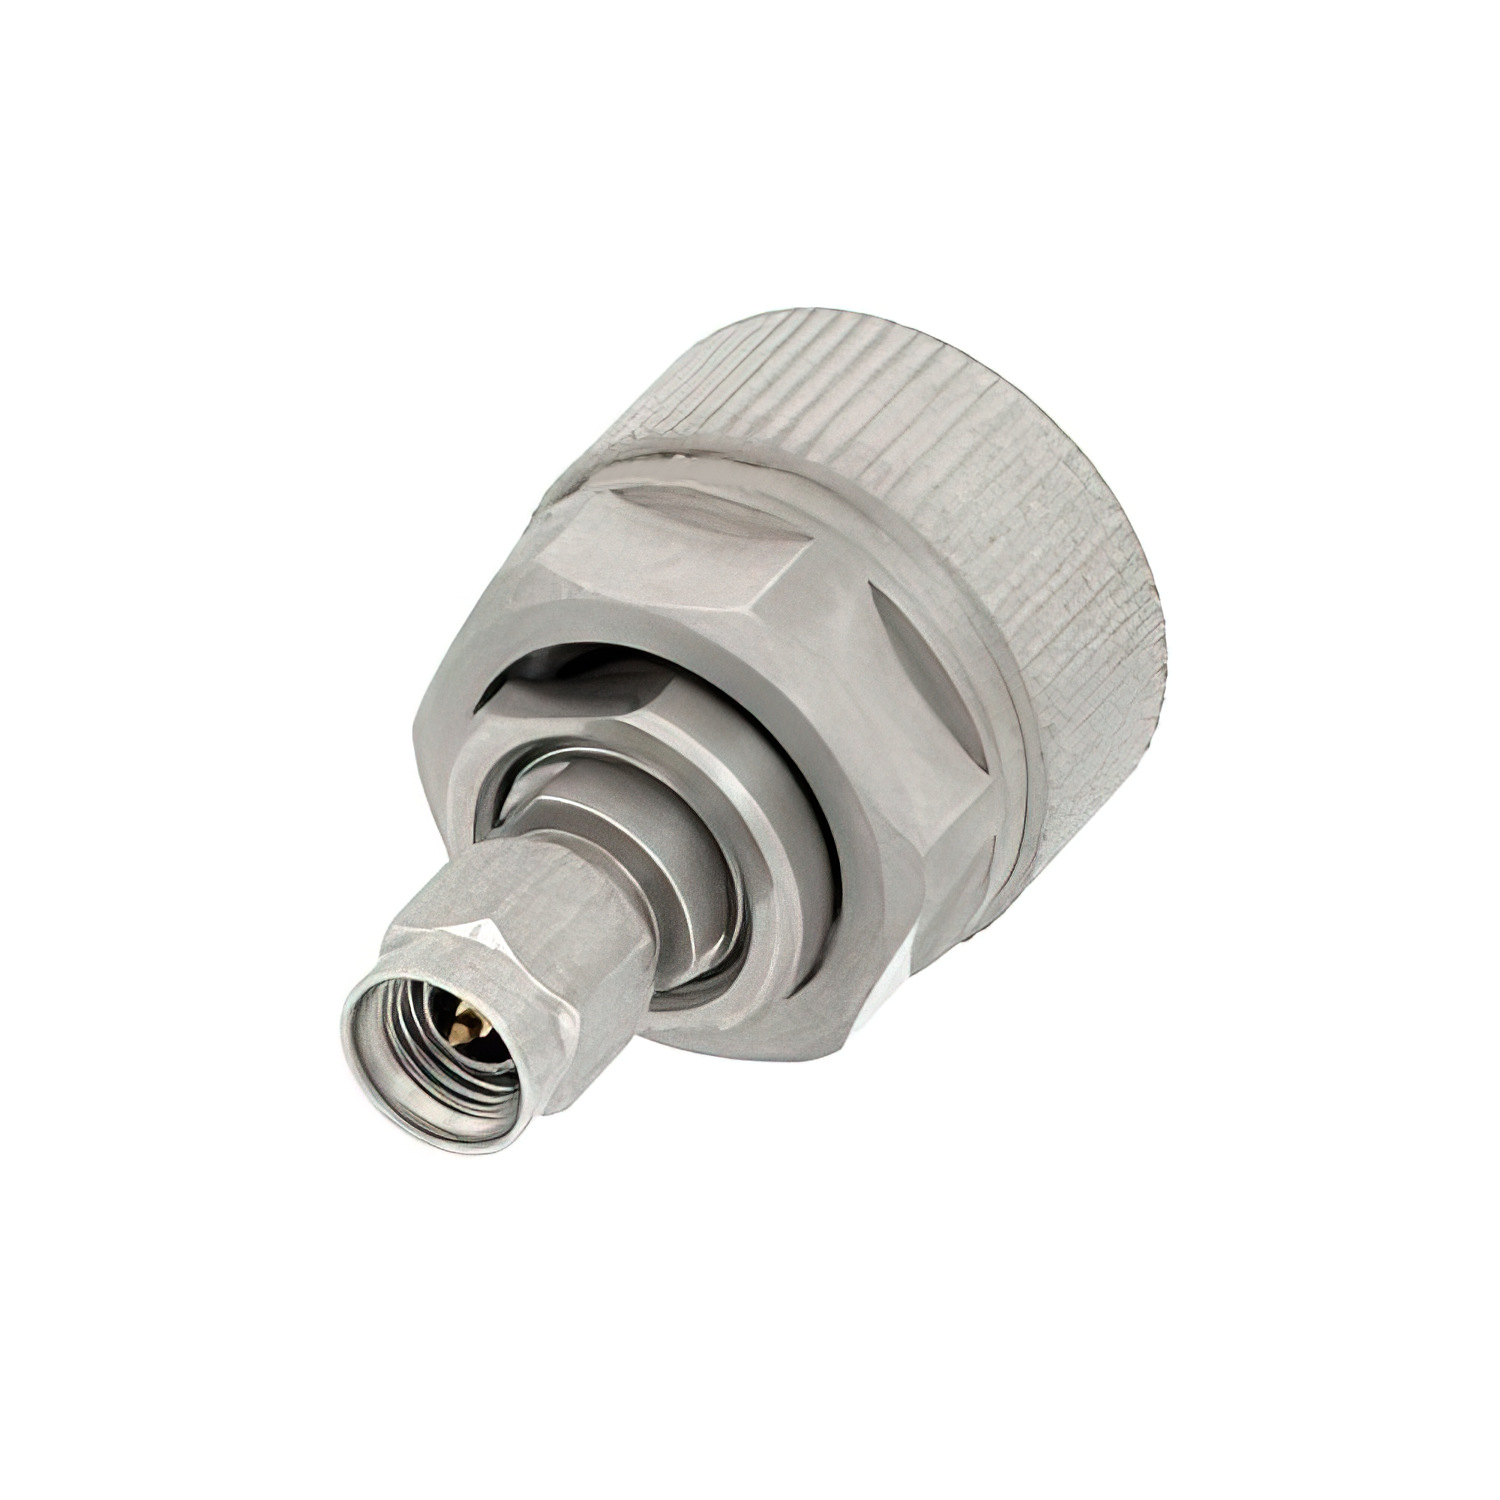 Precision 3.5mm Male to 7mm Sexless Adapter1